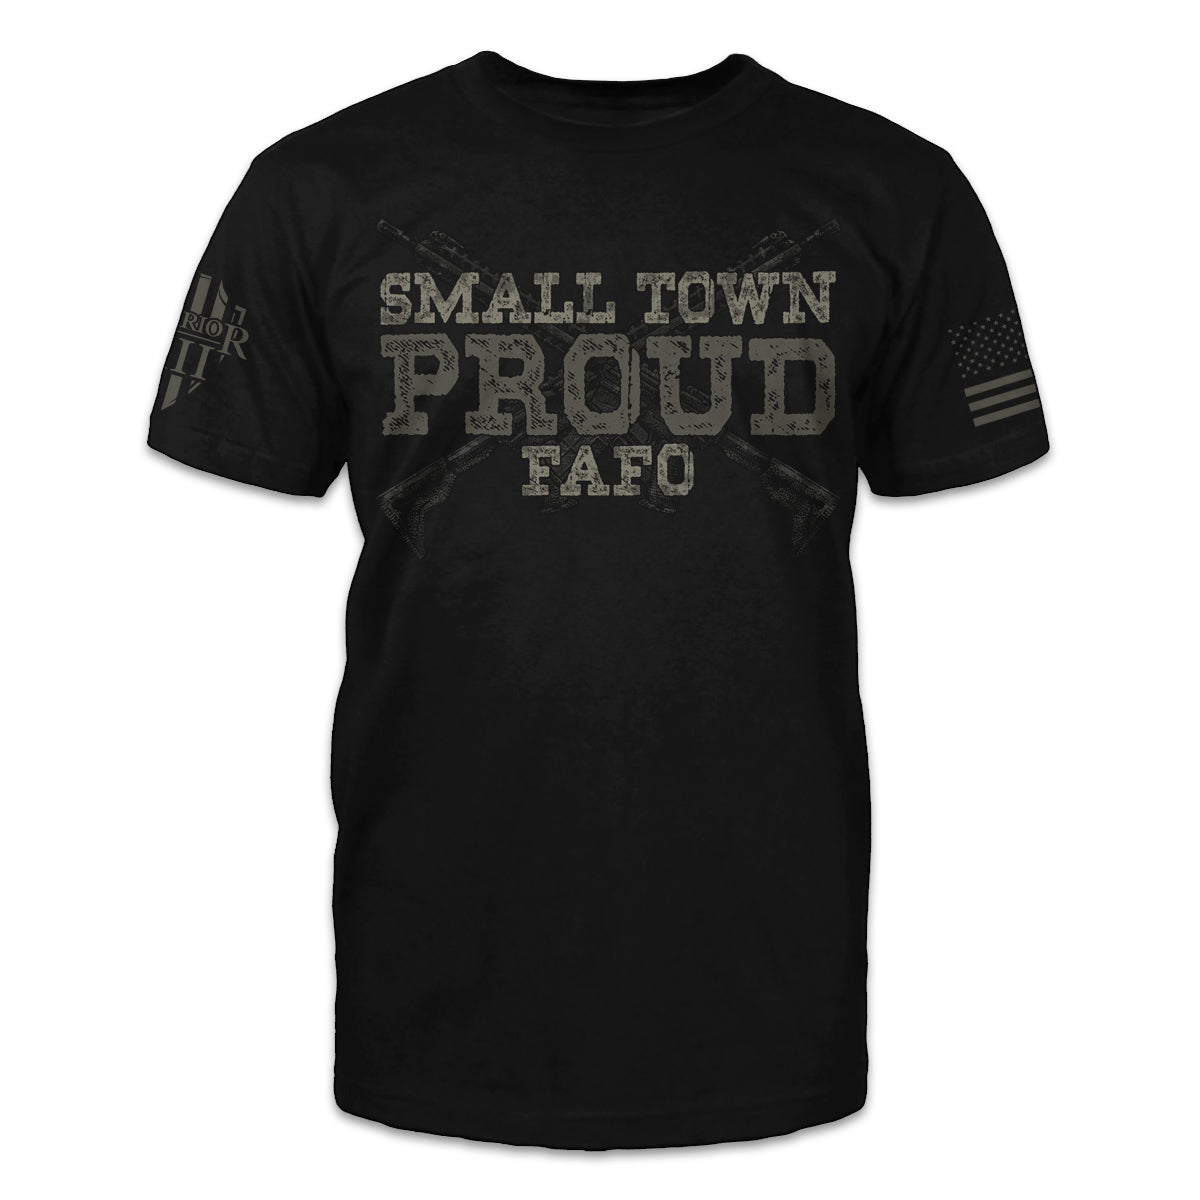 A black t-shirt with the words "Small Town Proud - FAFO" on the front with crossed Ar-15 rifles in the background.